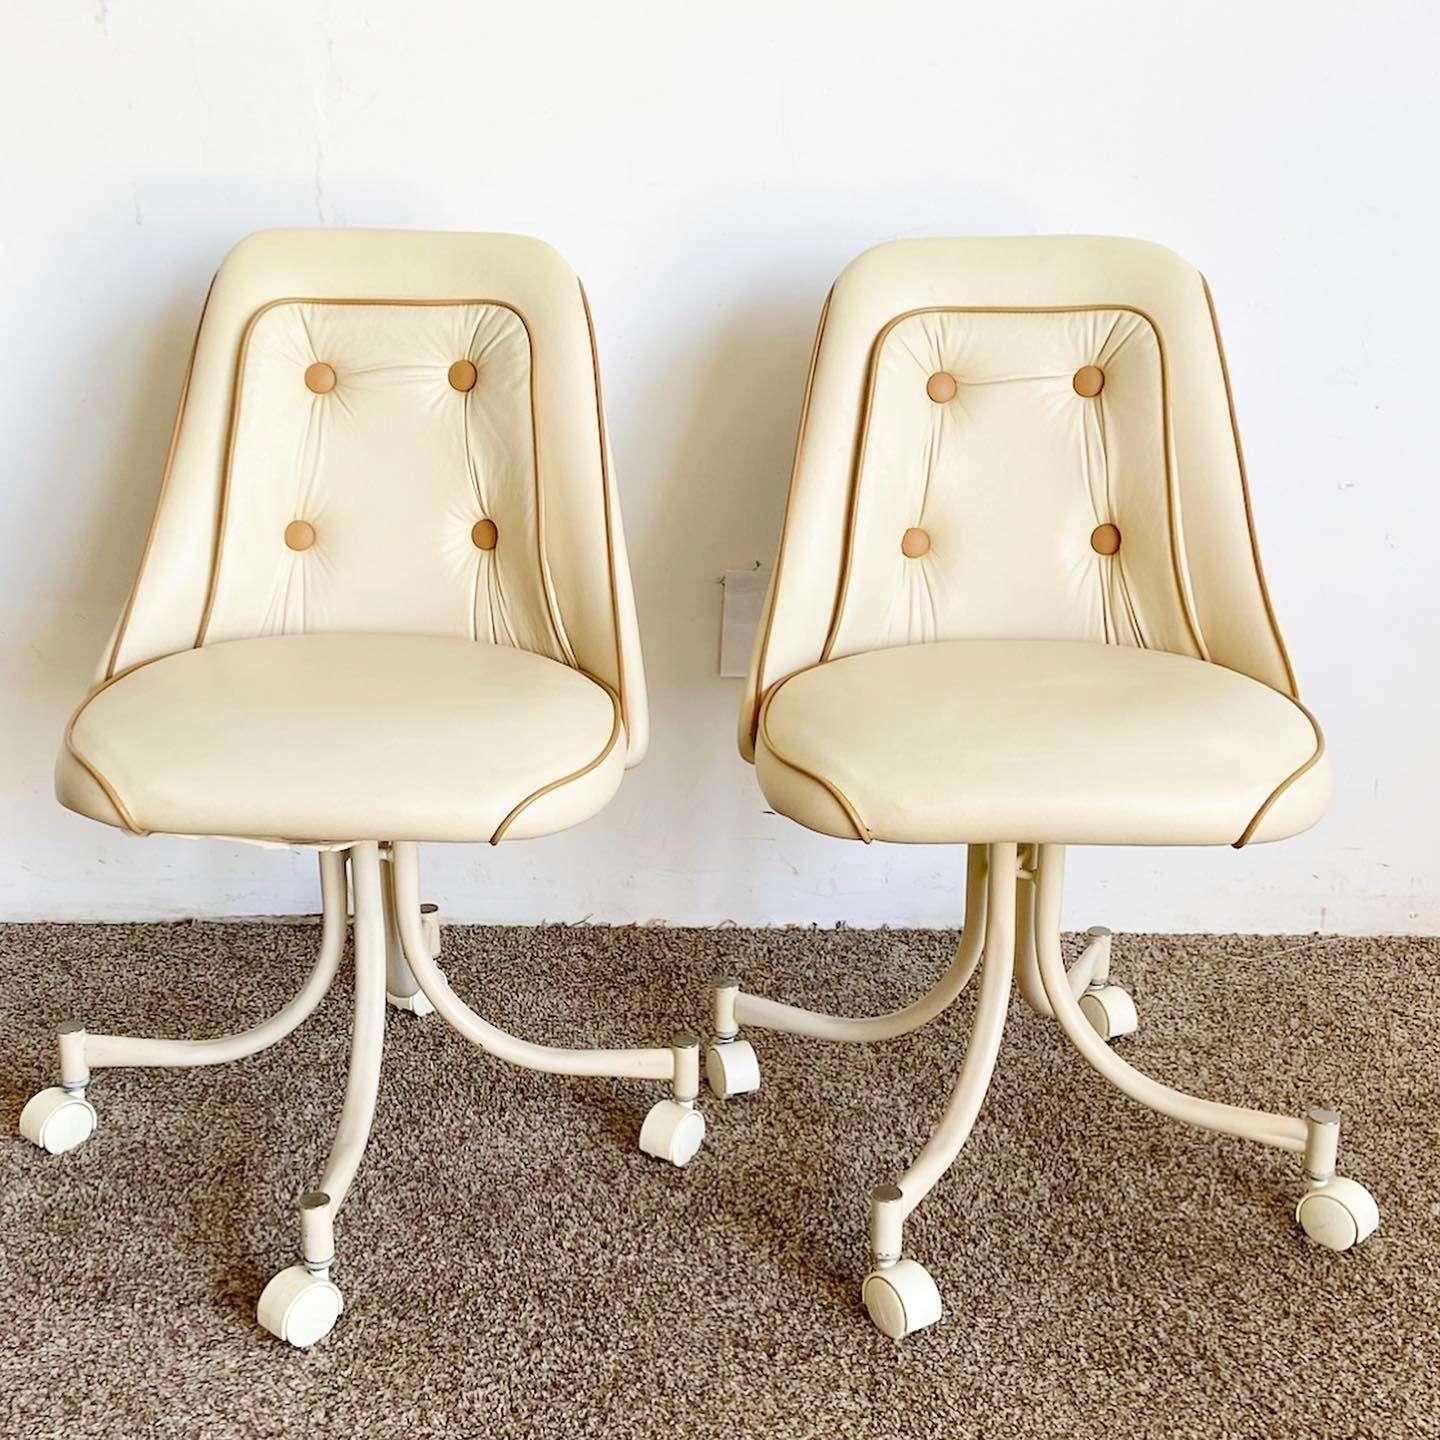 Exceptional vintage mid century modern swivel dining chairs in casters. Each chair features a tan and brown vinyl seat cushion and tufted back rest.

Seat height is 19.0 in